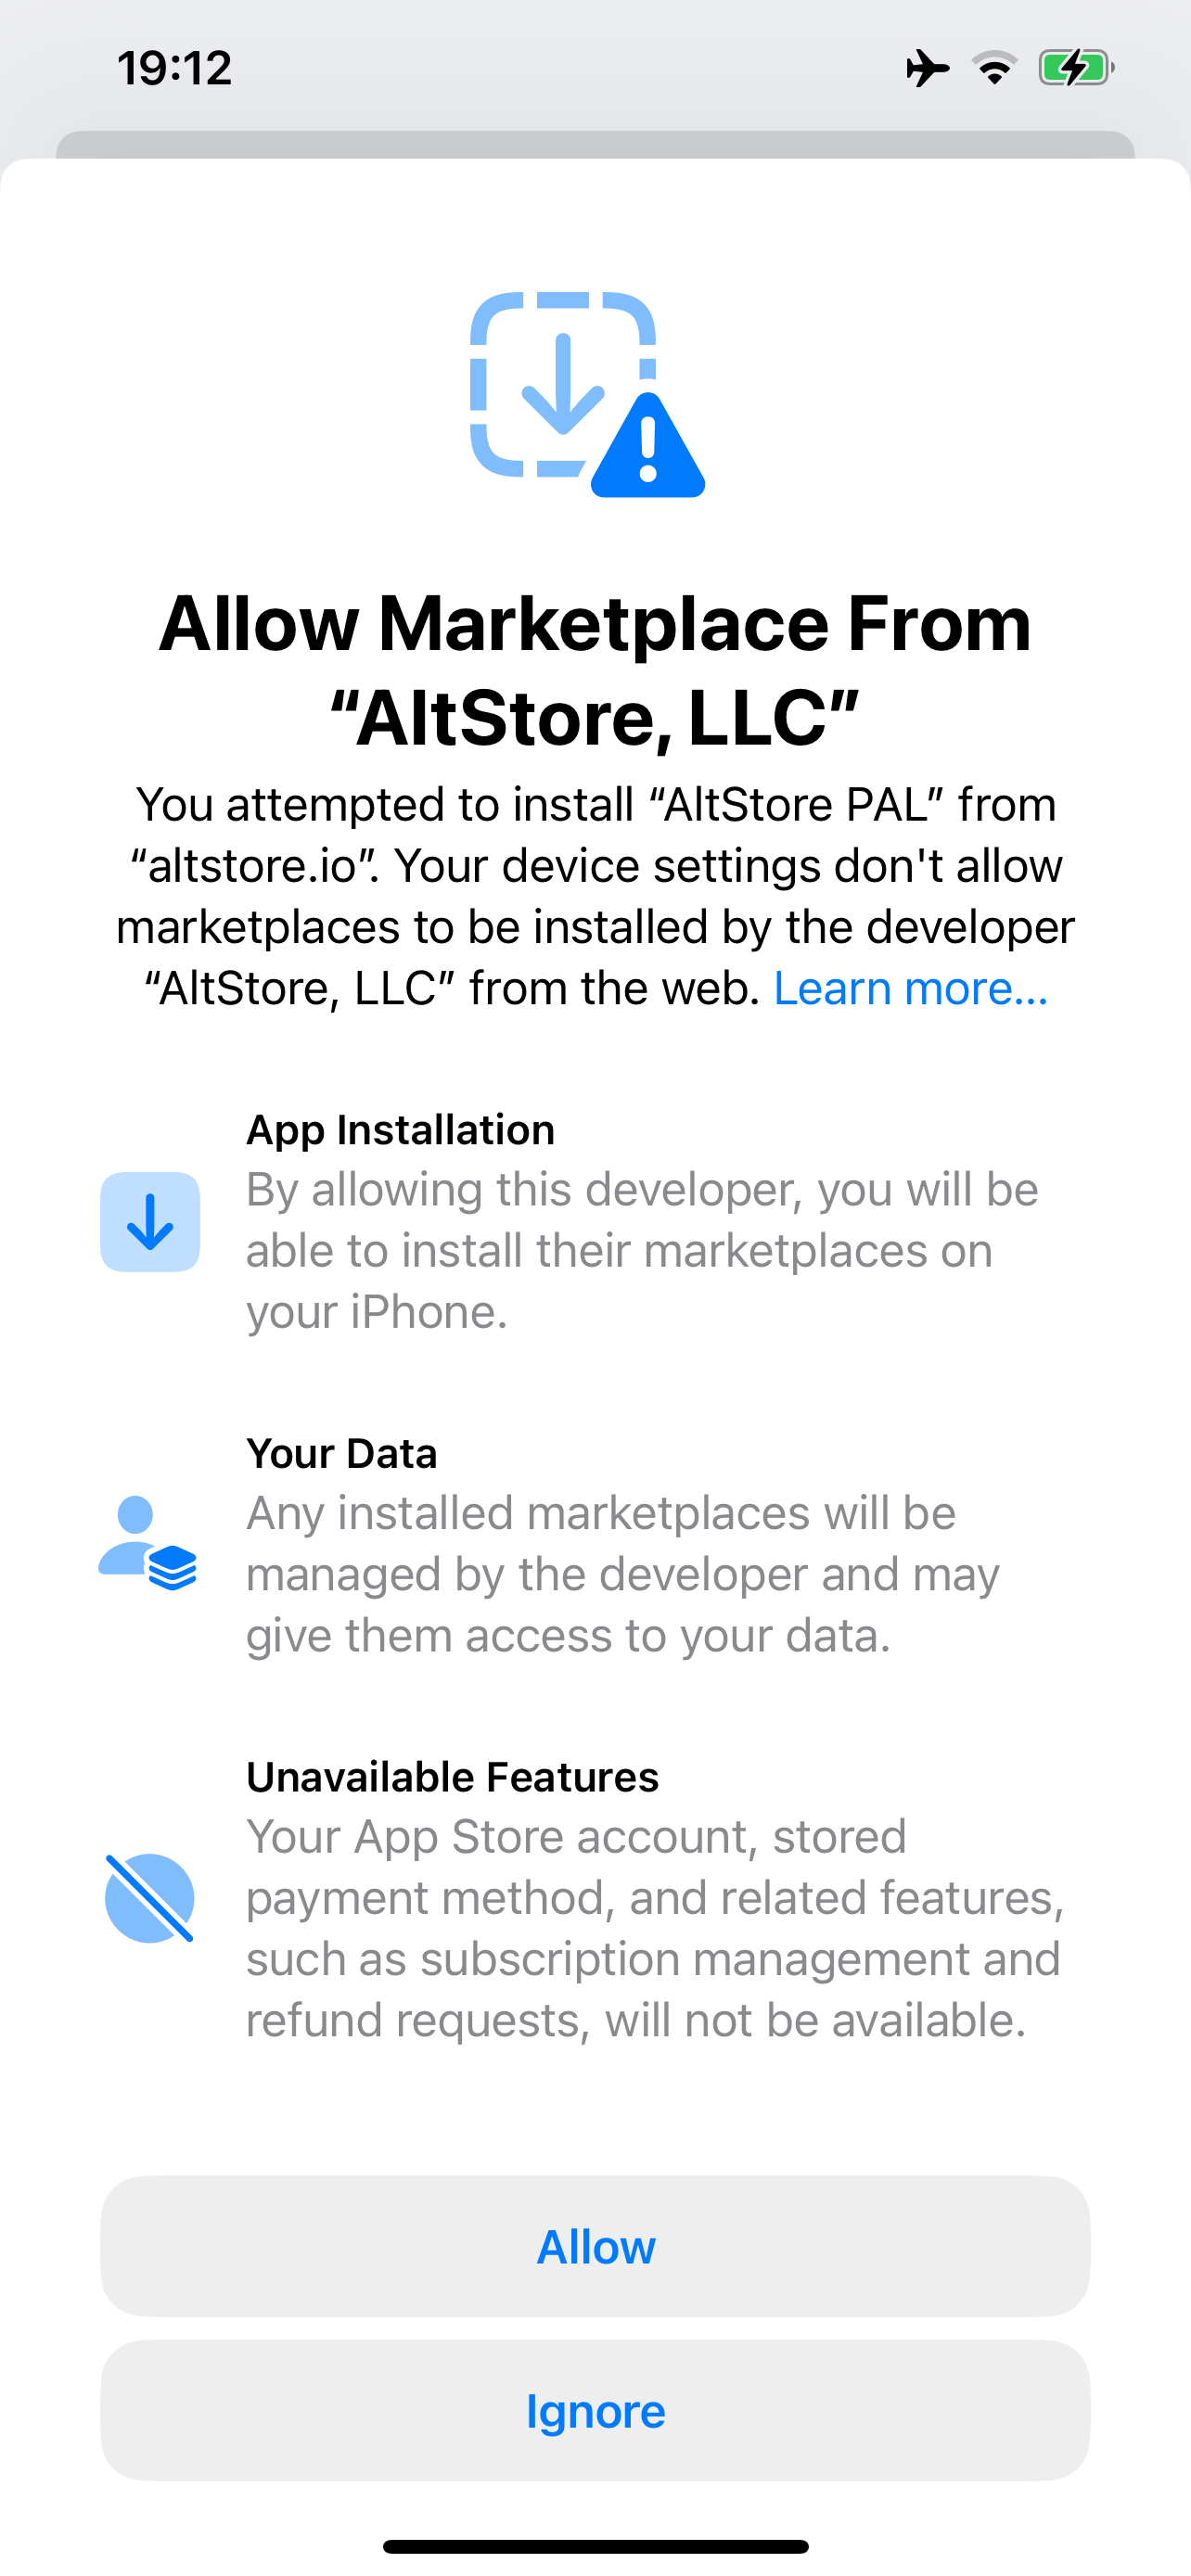 A full-screen prompt in Settings: Allow Marketplace From “AltStore, LLC” You attempted to install “AltStore PAL” from “altstore.io”. Your device settings don't allow marketplaces to be installed by the developer “AltStore, LLC” from the web. Learn more… App Installation: By allowing this developer, you will be able to install their marketplaces on your iPhone. Your Data: Any installed marketplaces will be managed by the developer and may give them access to your data. Unavailable Features: Your App Store account, stored payment method, and related features, such as subscription management and refund requests, will not be available. Buttons: [Allow] [Ignore] both with a neutral grey background